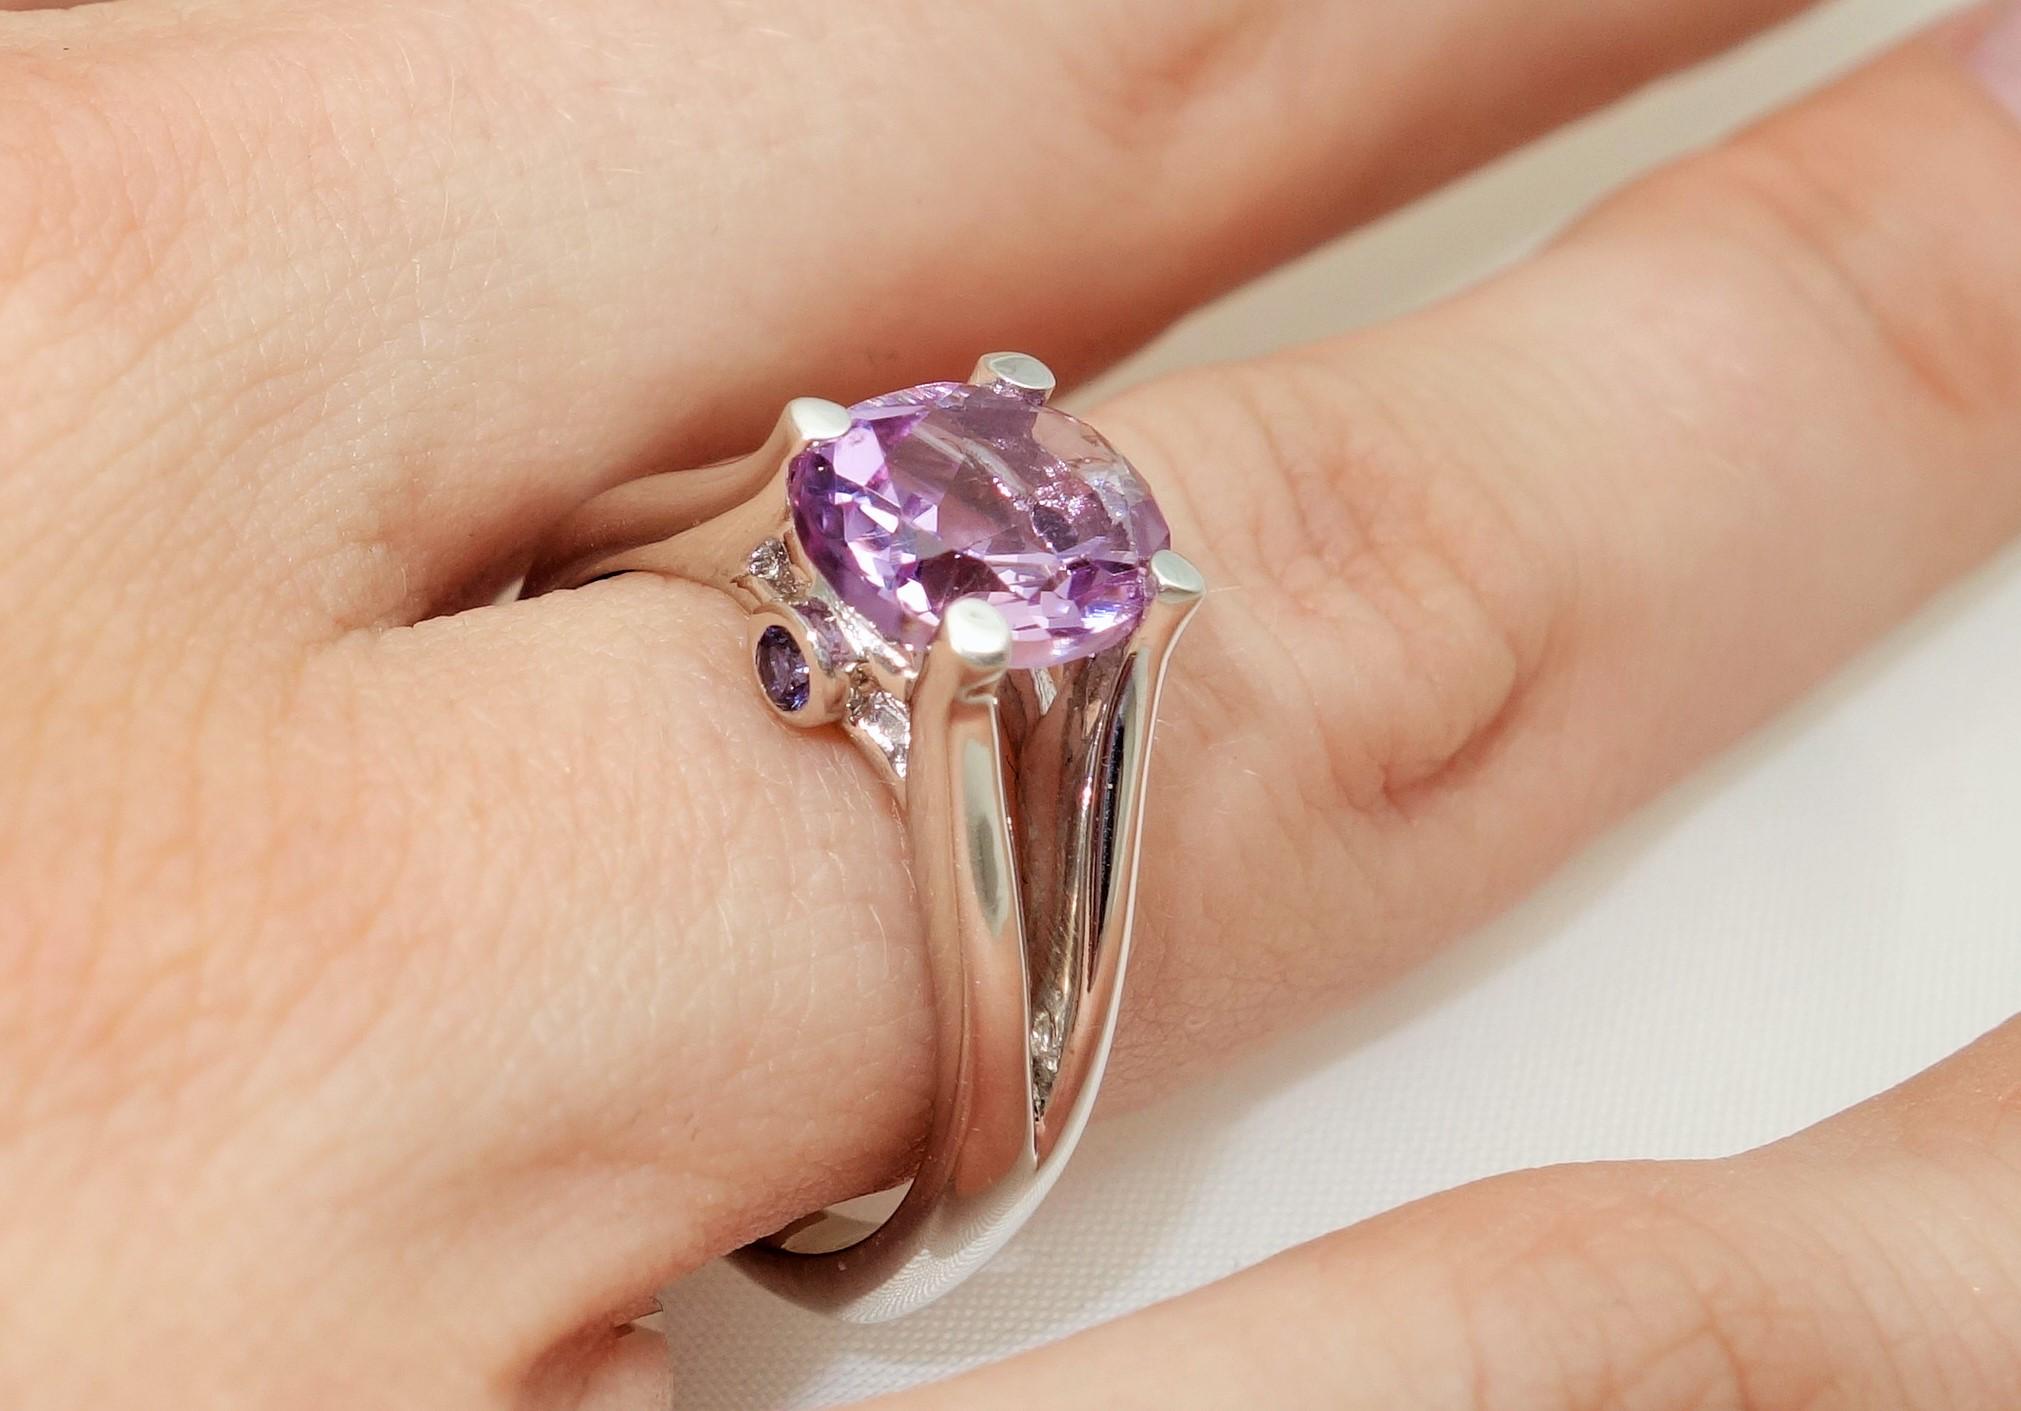 Beautiful ring featuring a 2.33 Carat Rose de France Amethyst in center enhanced with Sapphires; approx. 0.07 total carat weight; Sterling Silver Tarnish-resistant Rhodium mounting. Size 8, we offer ring re-sizing; Classic and Stylish…illuminating